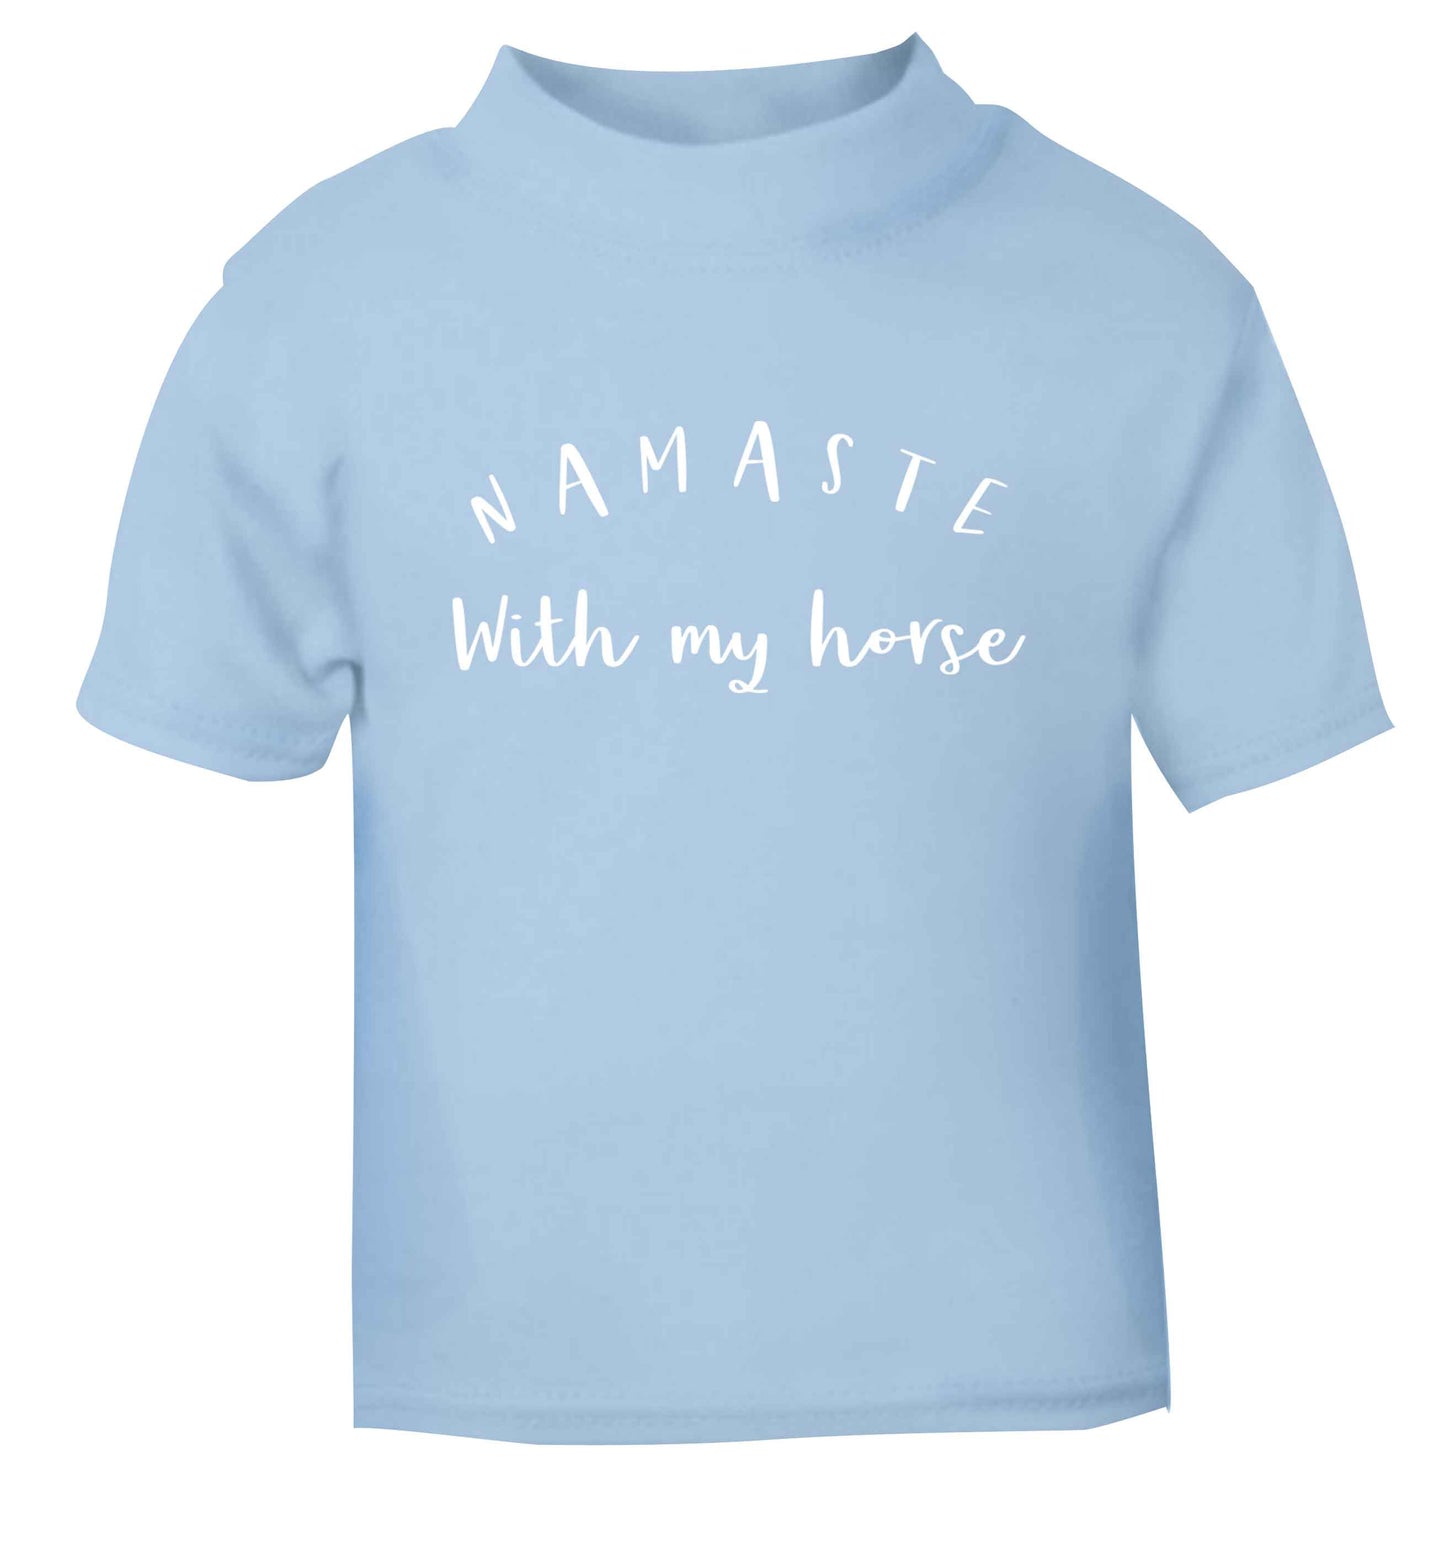 Namaste with my horse light blue baby toddler Tshirt 2 Years